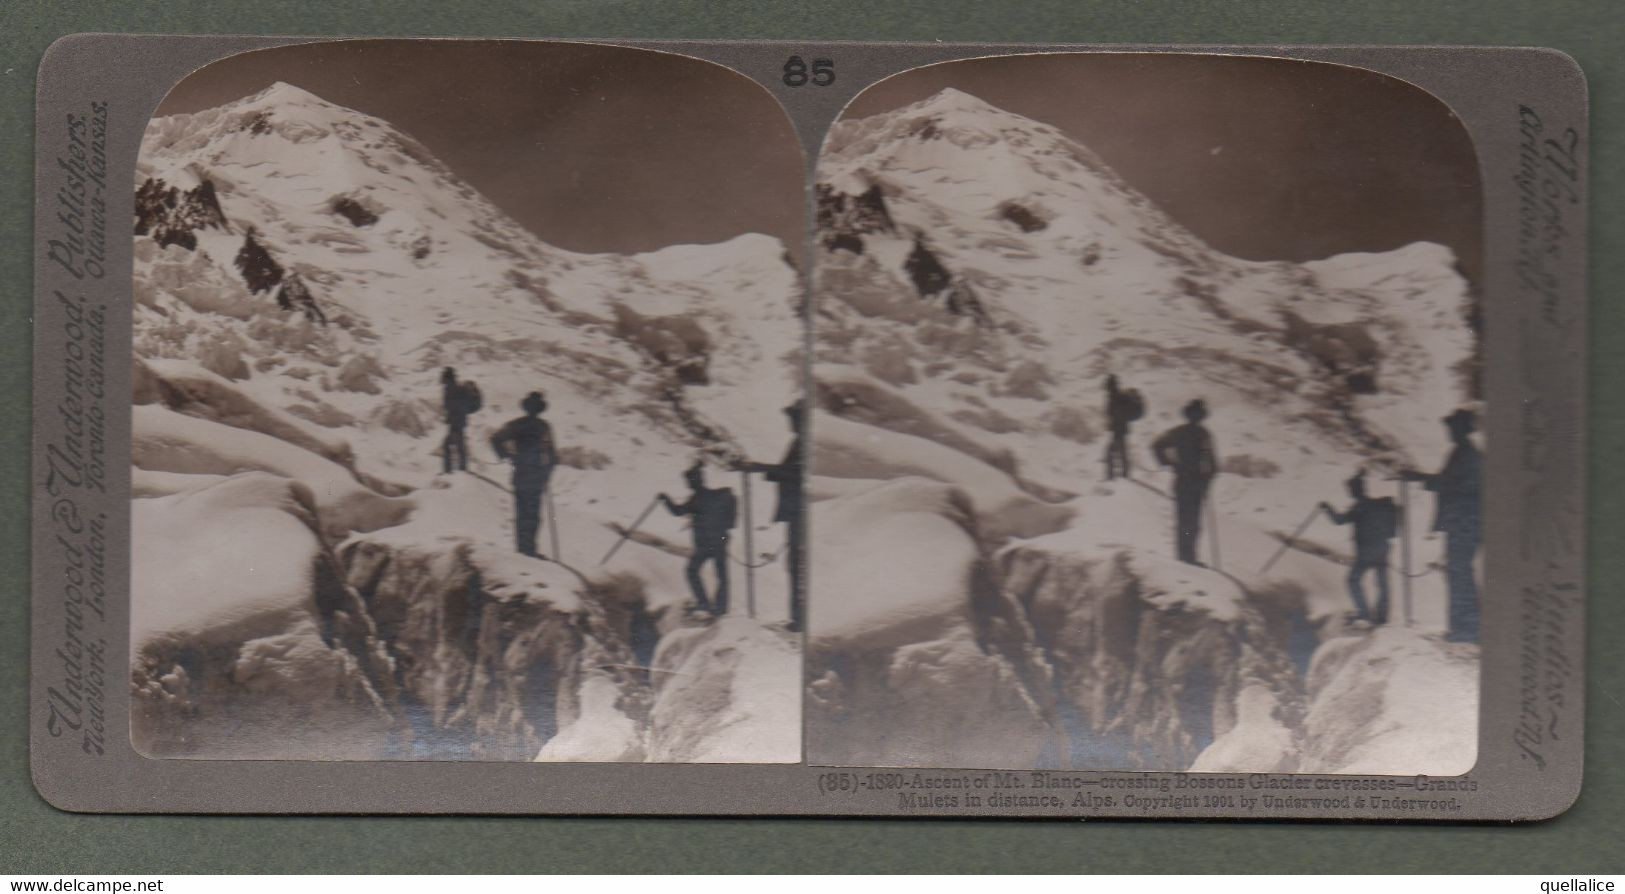 02153 "1820-ASCENT OF MT. BLANC-CROSSING BOSSONS GLACIER CREVASSES -GRANDS-MULETS IN DISTANCE-1901" STEREOSCOPICA ORIG. - Cartes Stéréoscopiques